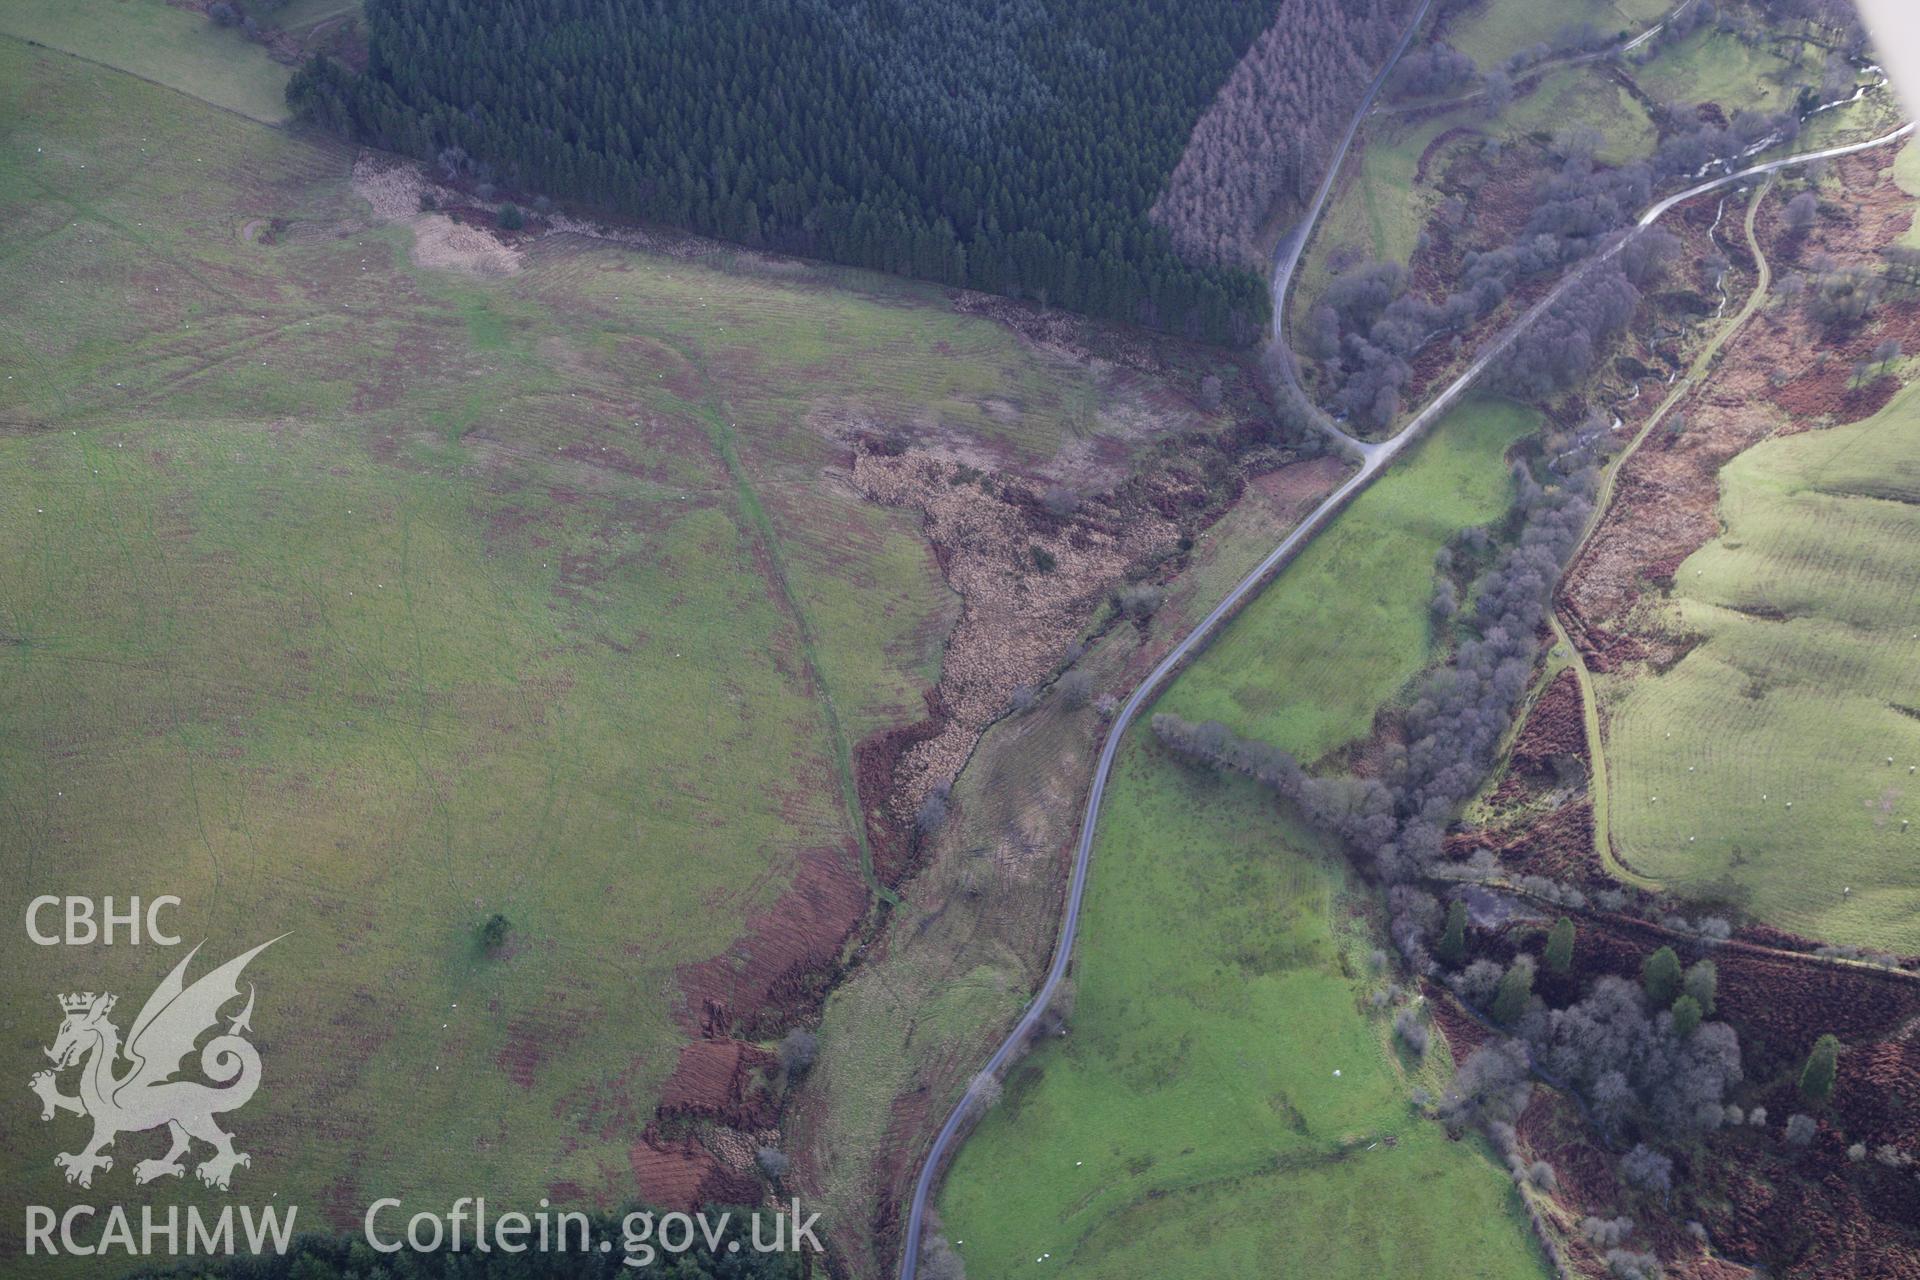 RCAHMW colour oblique aerial photograph of a section of the Monk's Trod from Abbey Cwm Hir to Park and Moel Hywel. Taken on 10 December 2009 by Toby Driver